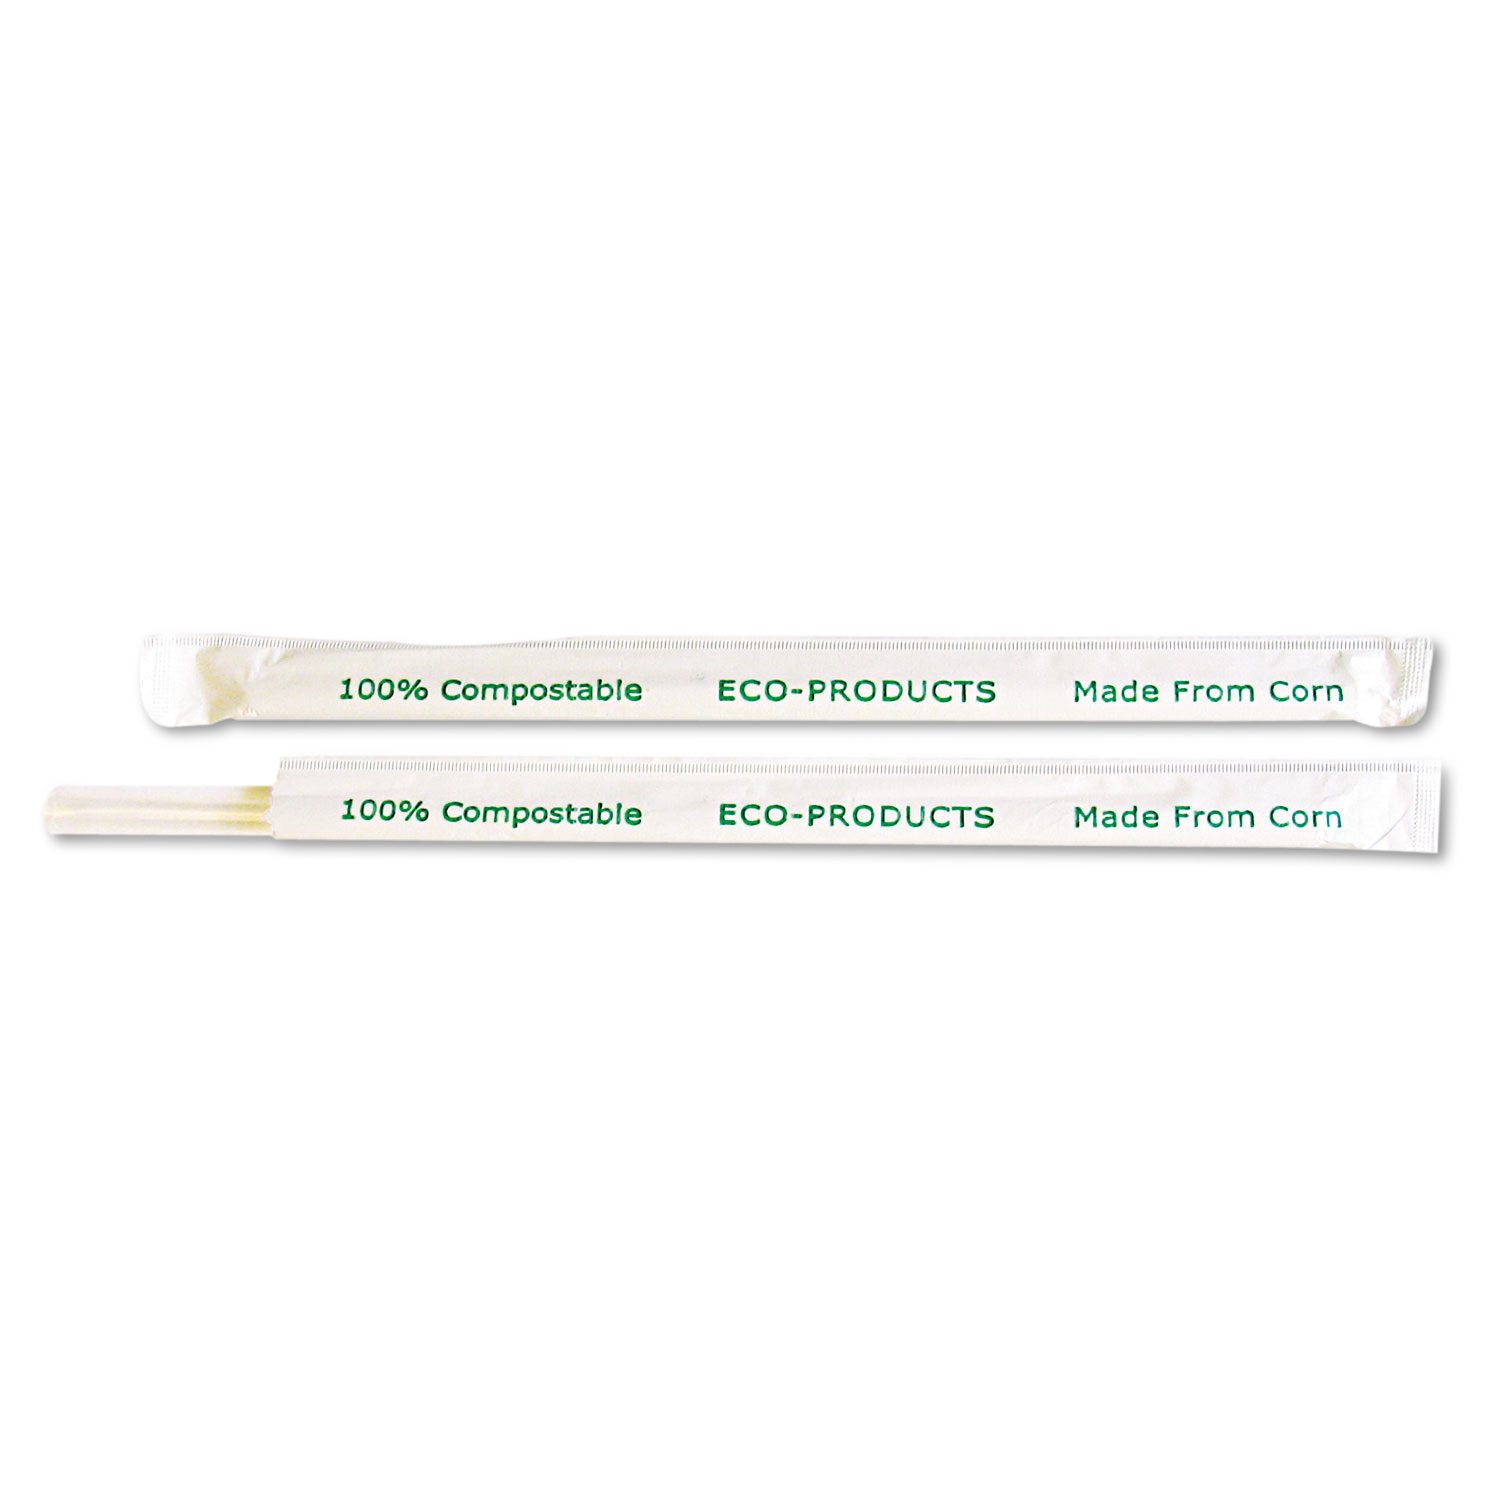  Eco-Products EP-ST770 7.75 Clear Wrapped Straw - Case, 400/PK, 24 PK/CT (ECOEPST770) 